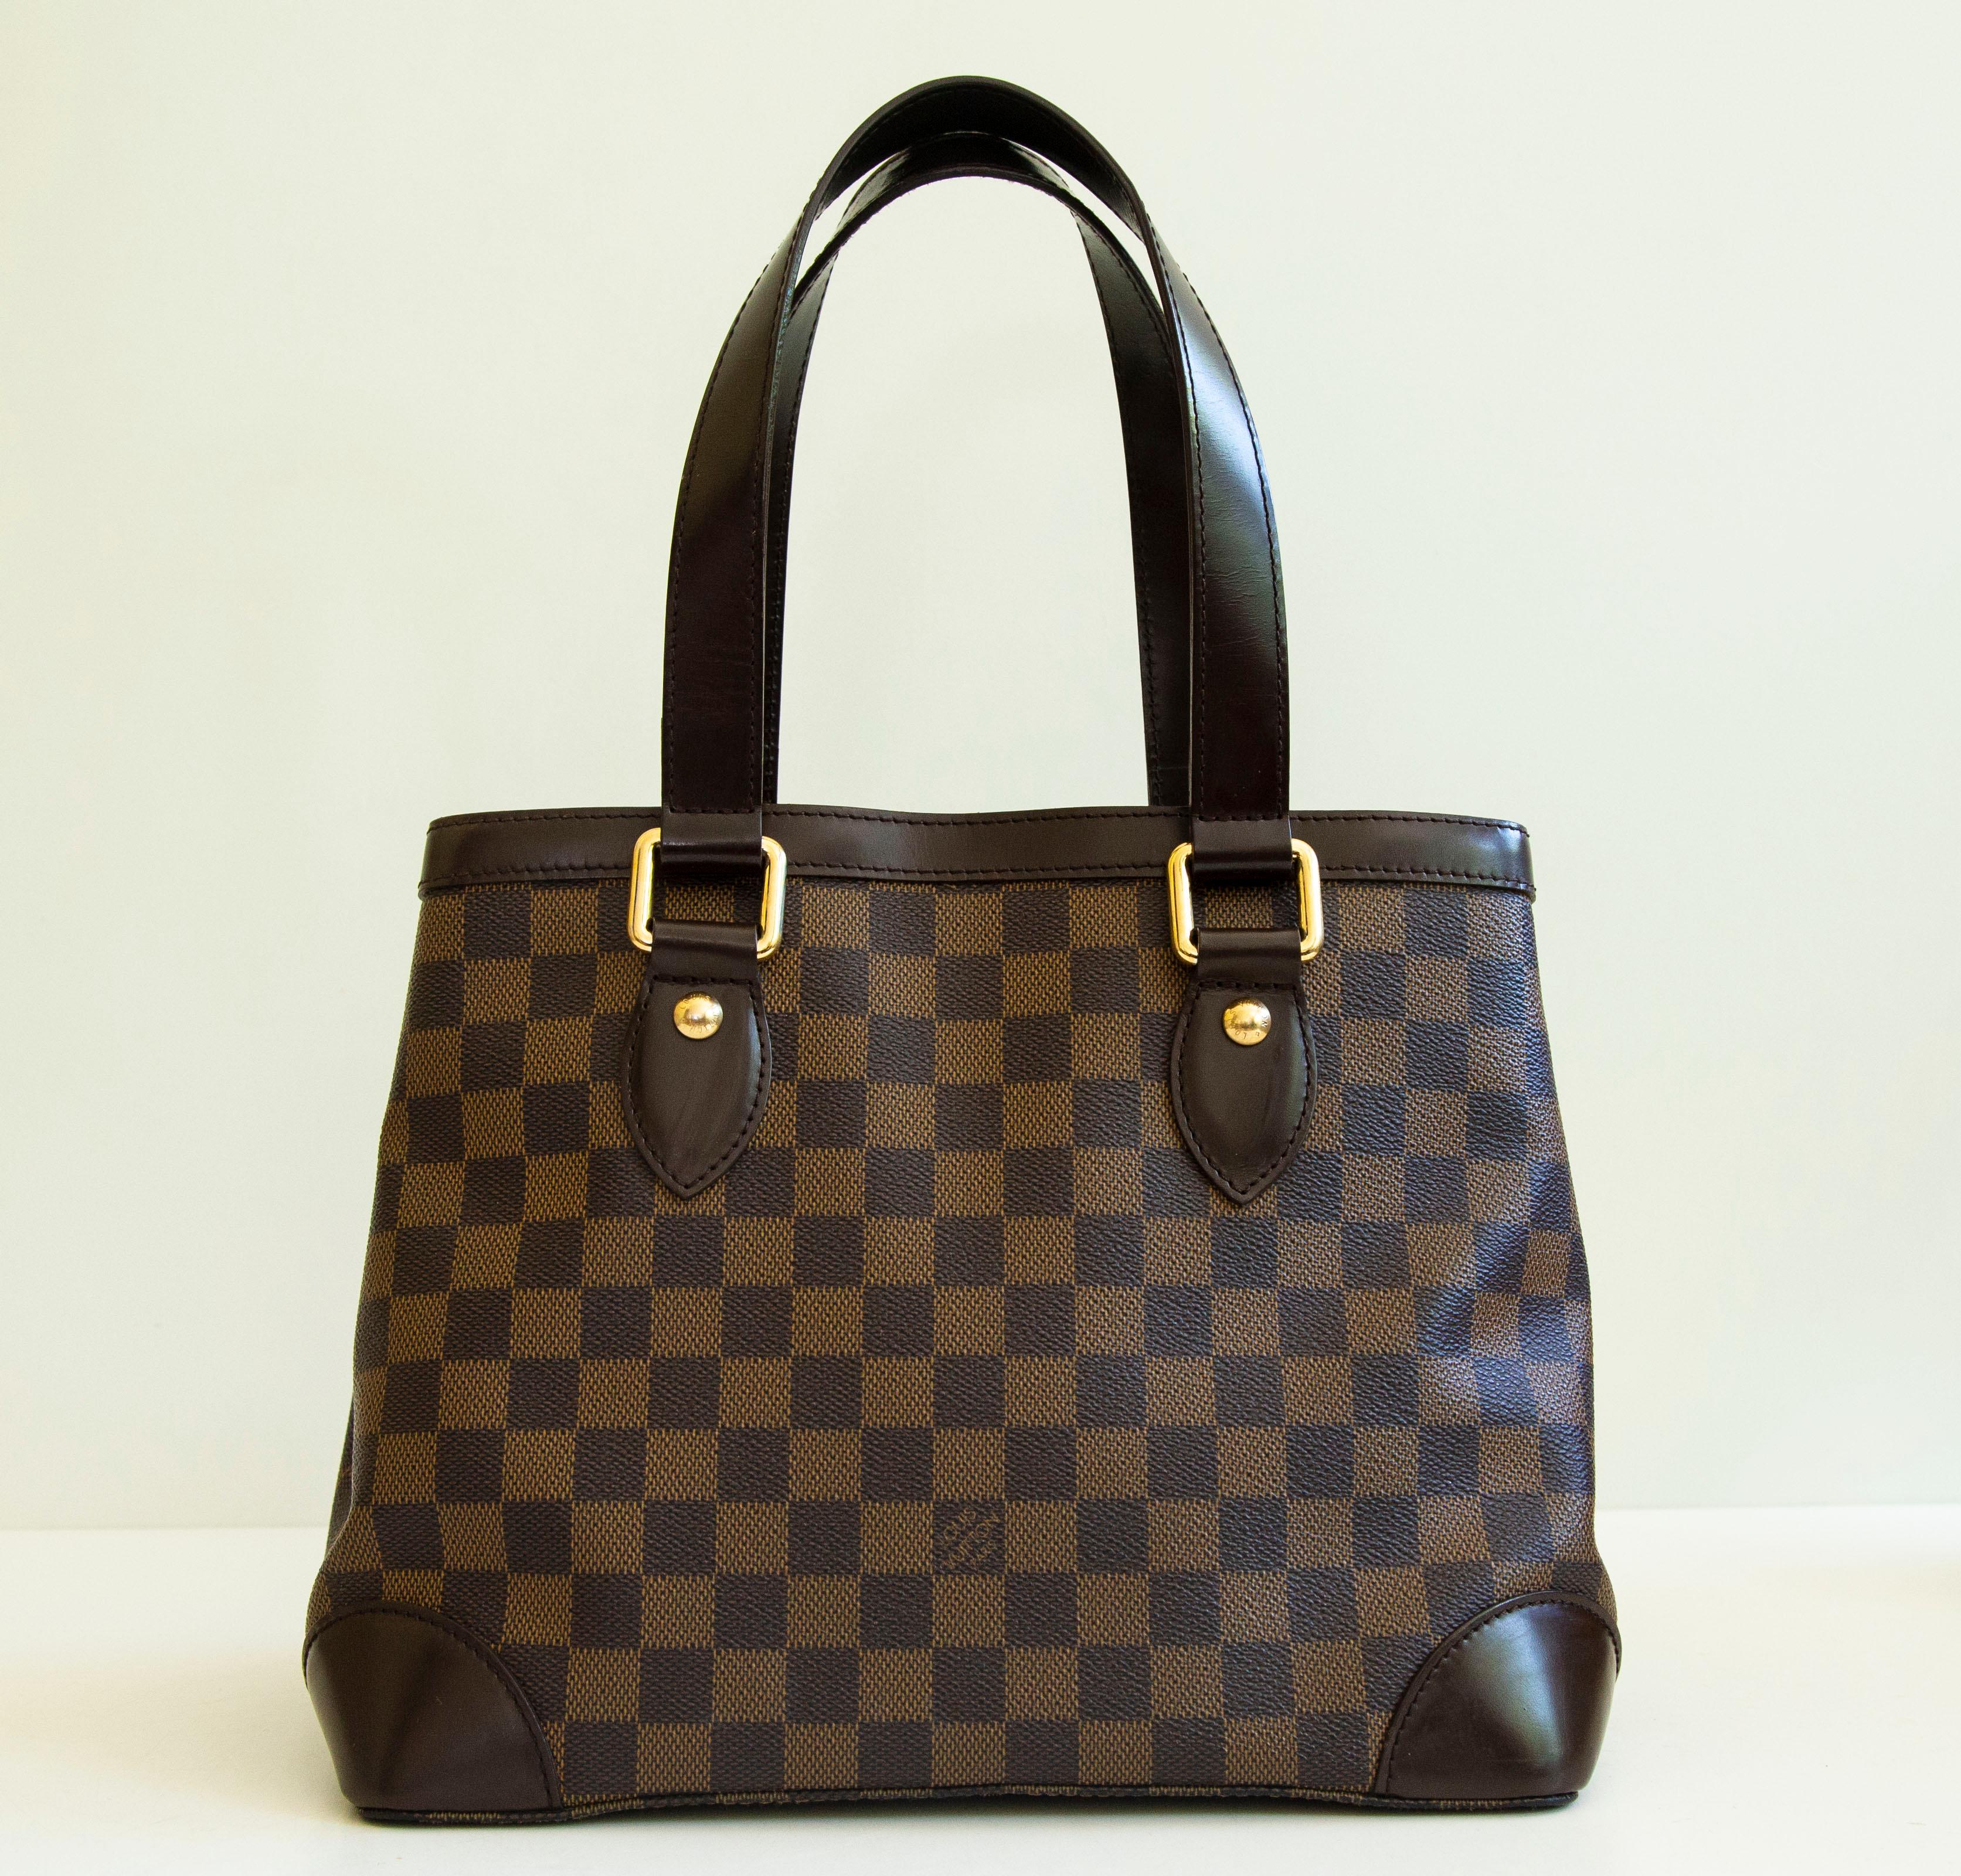 An authentic Louis Vuitton Hampstead PM. The bag features an Ebene Damier exterior, brown leather trim, and gold-toned hardware. The interior is lined with red fabric and there are three side pockets, one zipped pocket, and two slip pockets. The